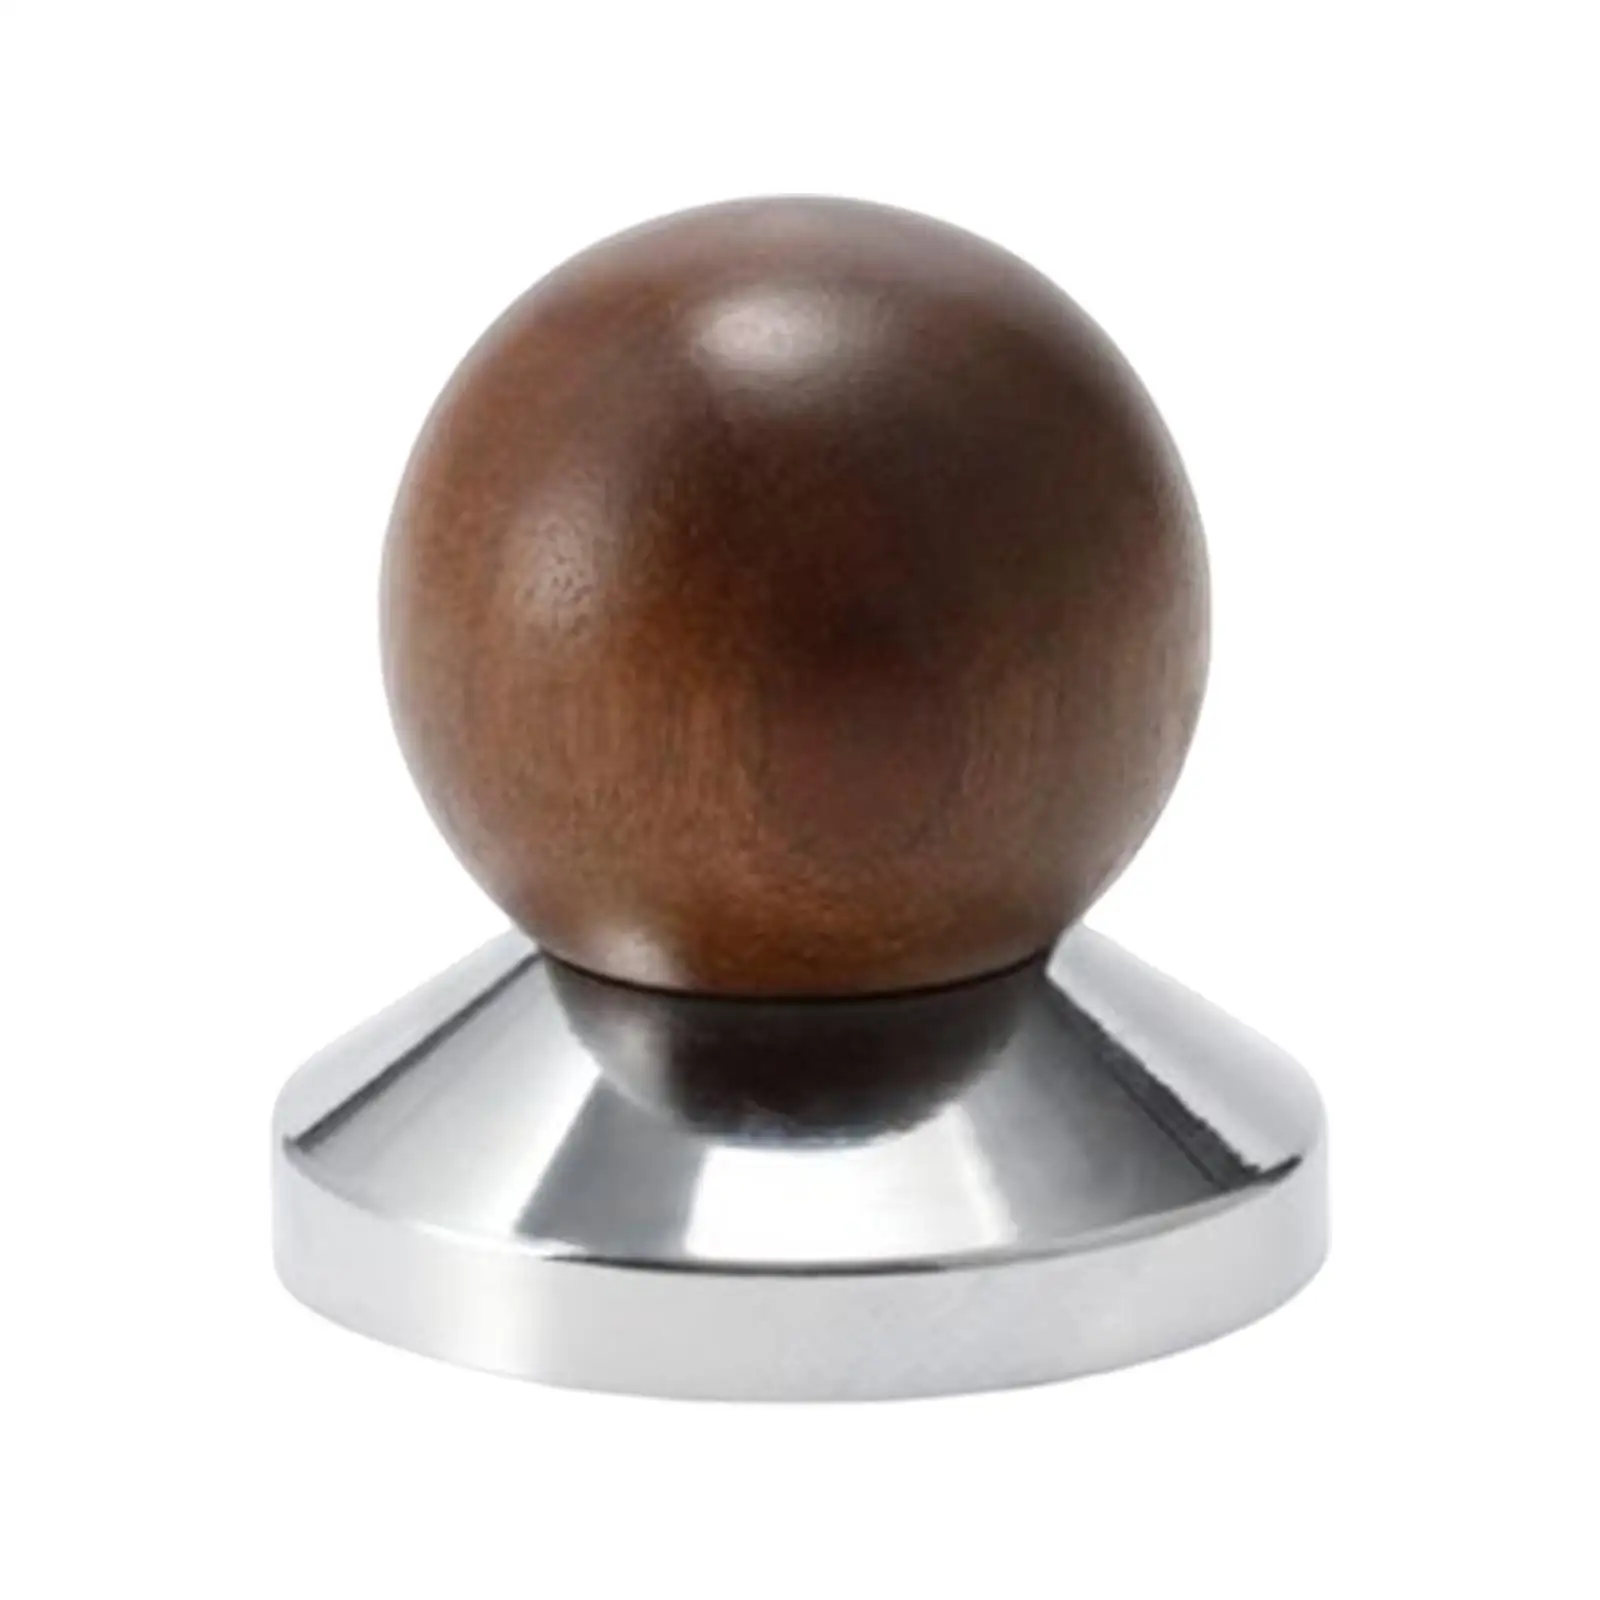 Professional Espresso Tamper/ Solid Wood Espresso Machine Accessory Flat Base Distributor/ Coffee Tamp Tool/ Home Cafe